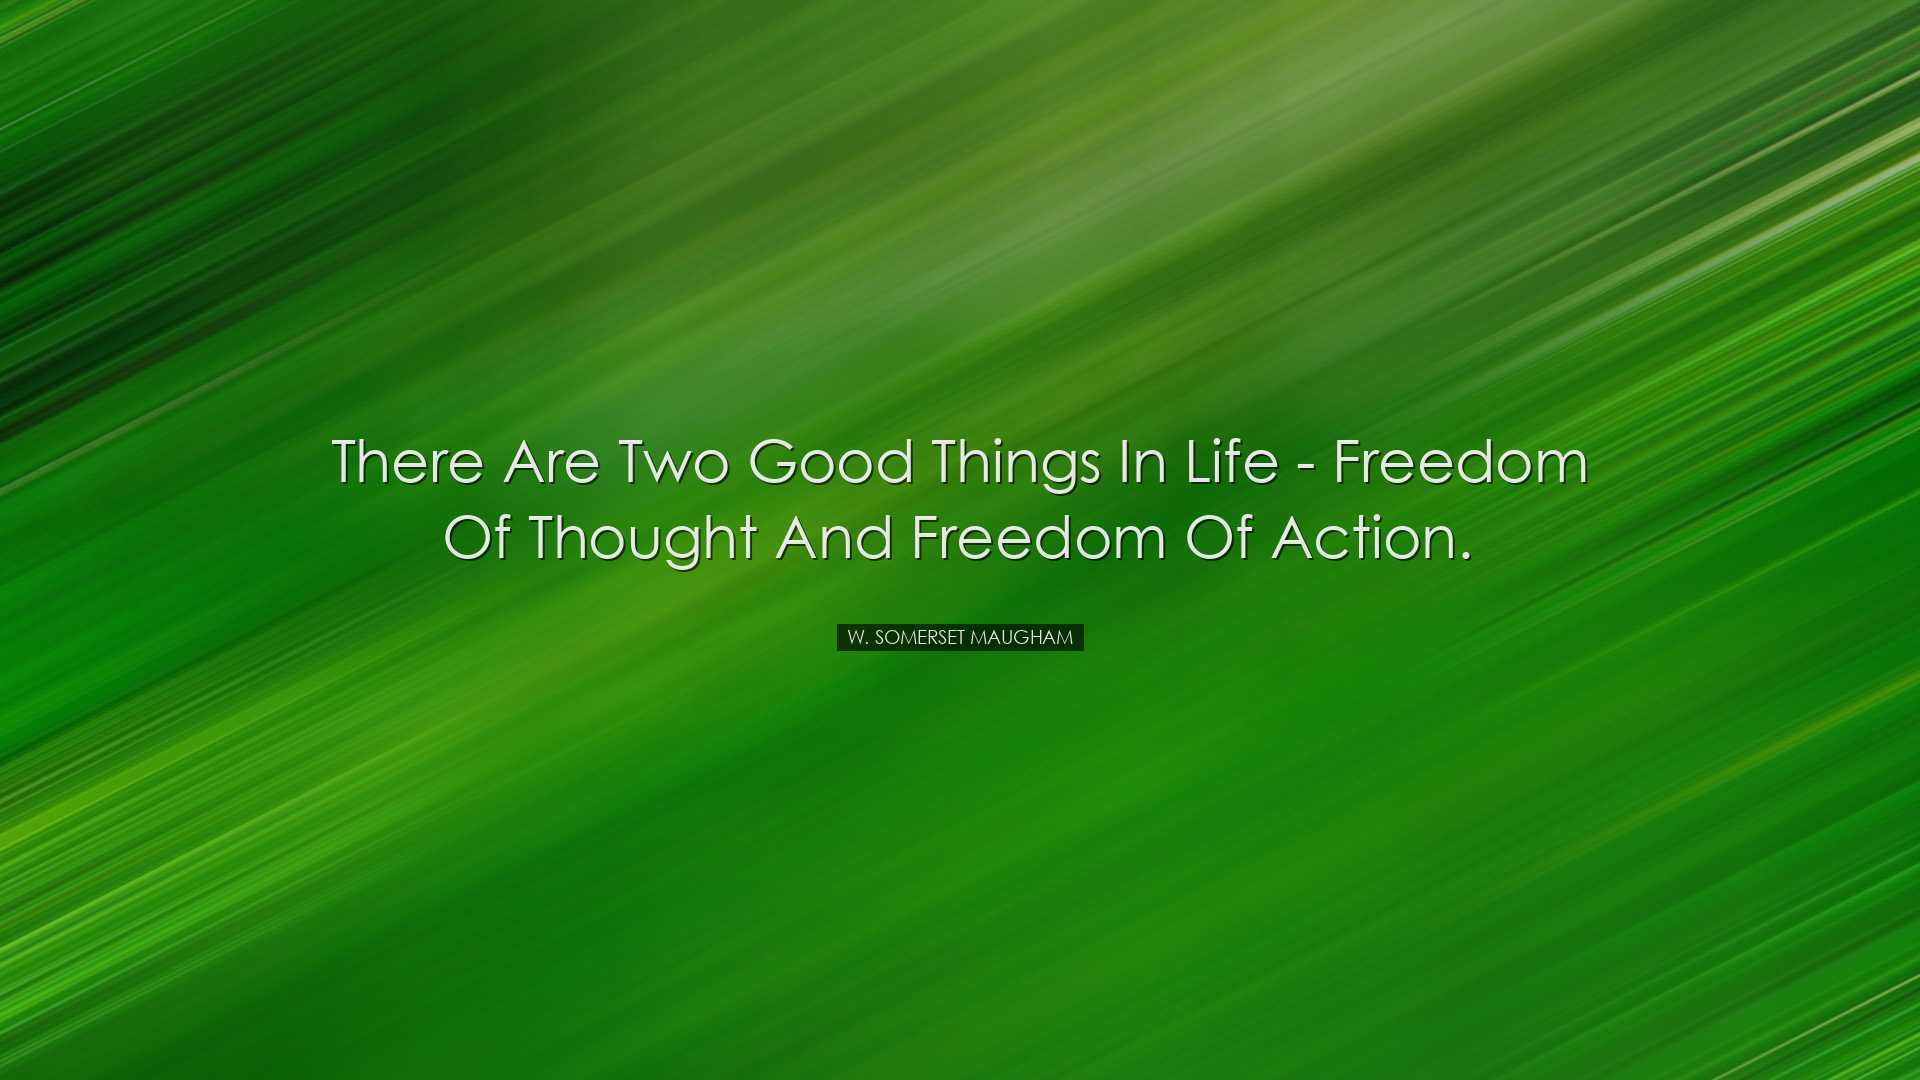 There are two good things in life - freedom of thought and freedom